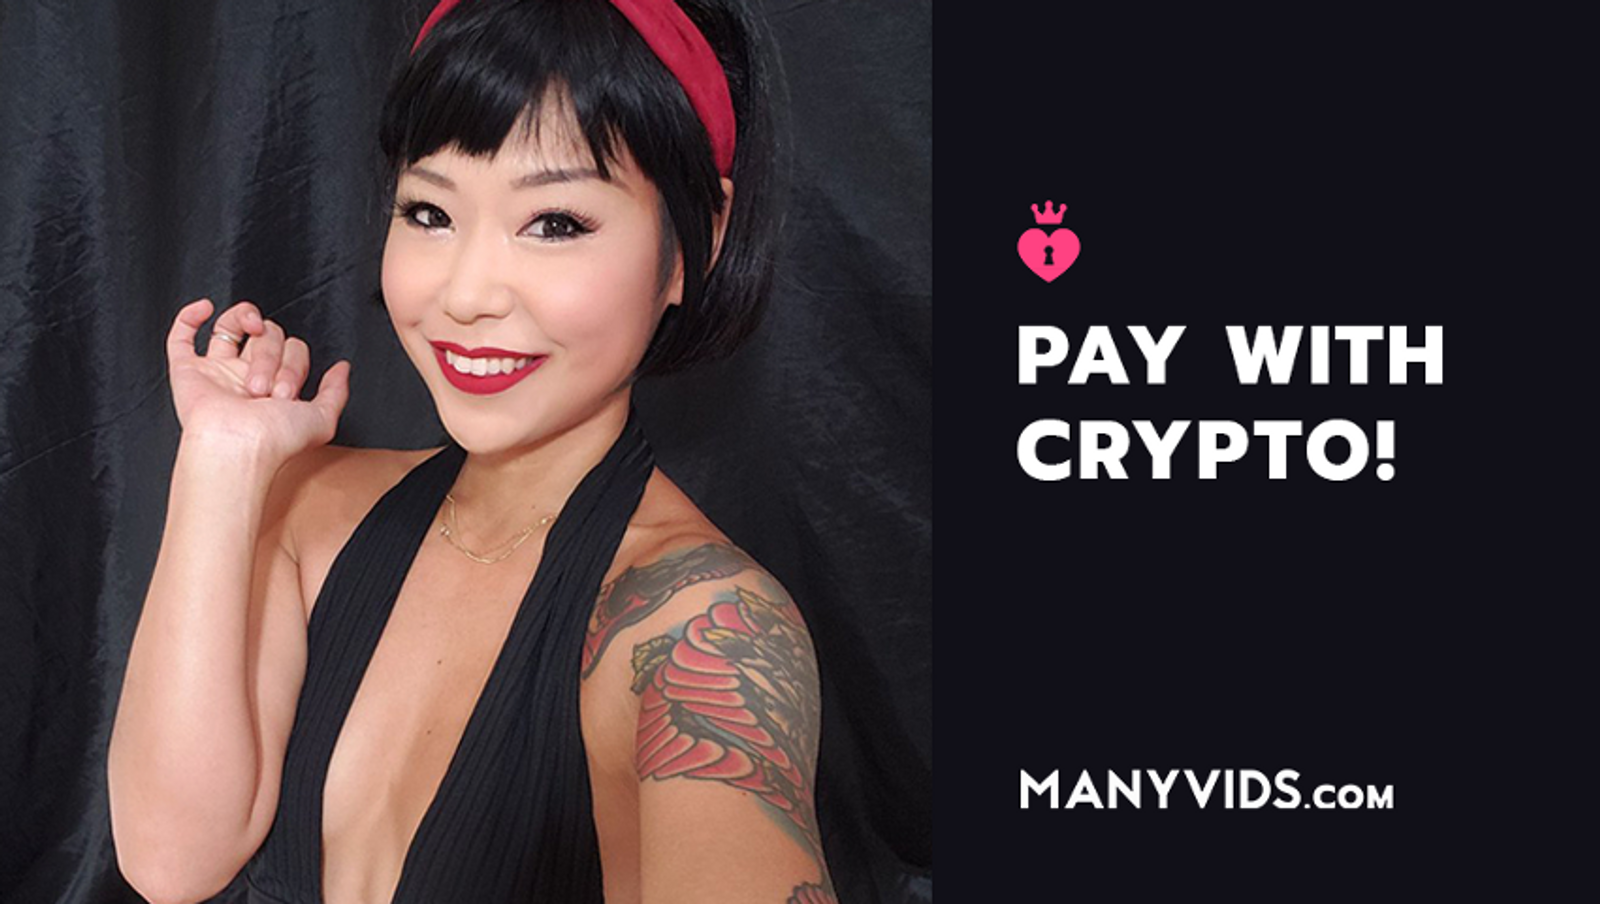 ManyVids Offers Option of Cryptocurrency Payments